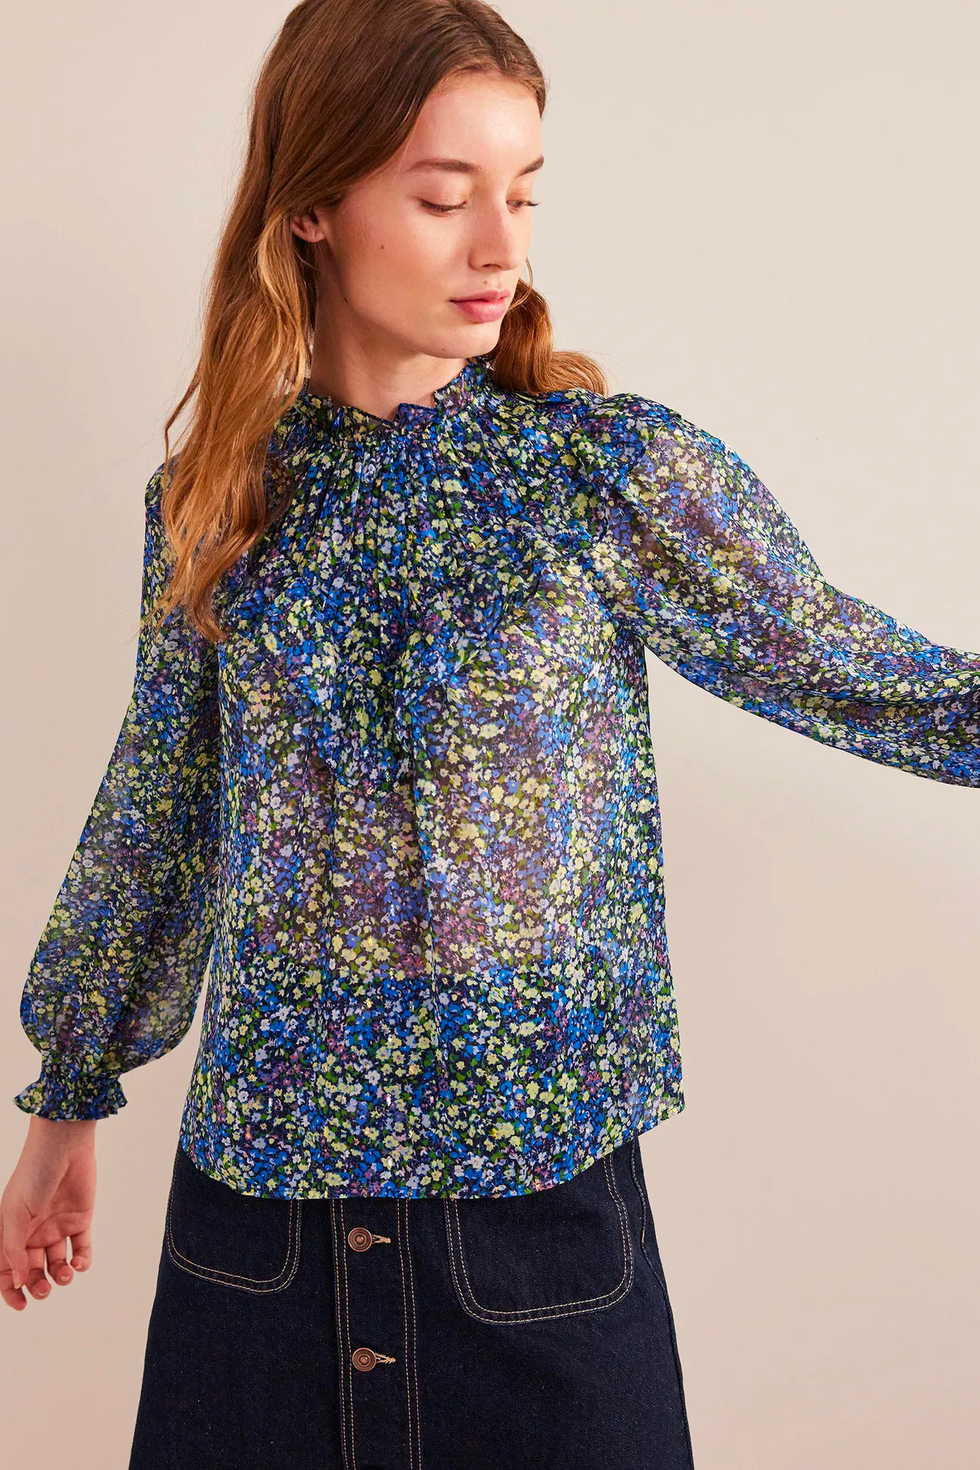 Boden polka dot blouse - Boden is selling the perfect summer blouse